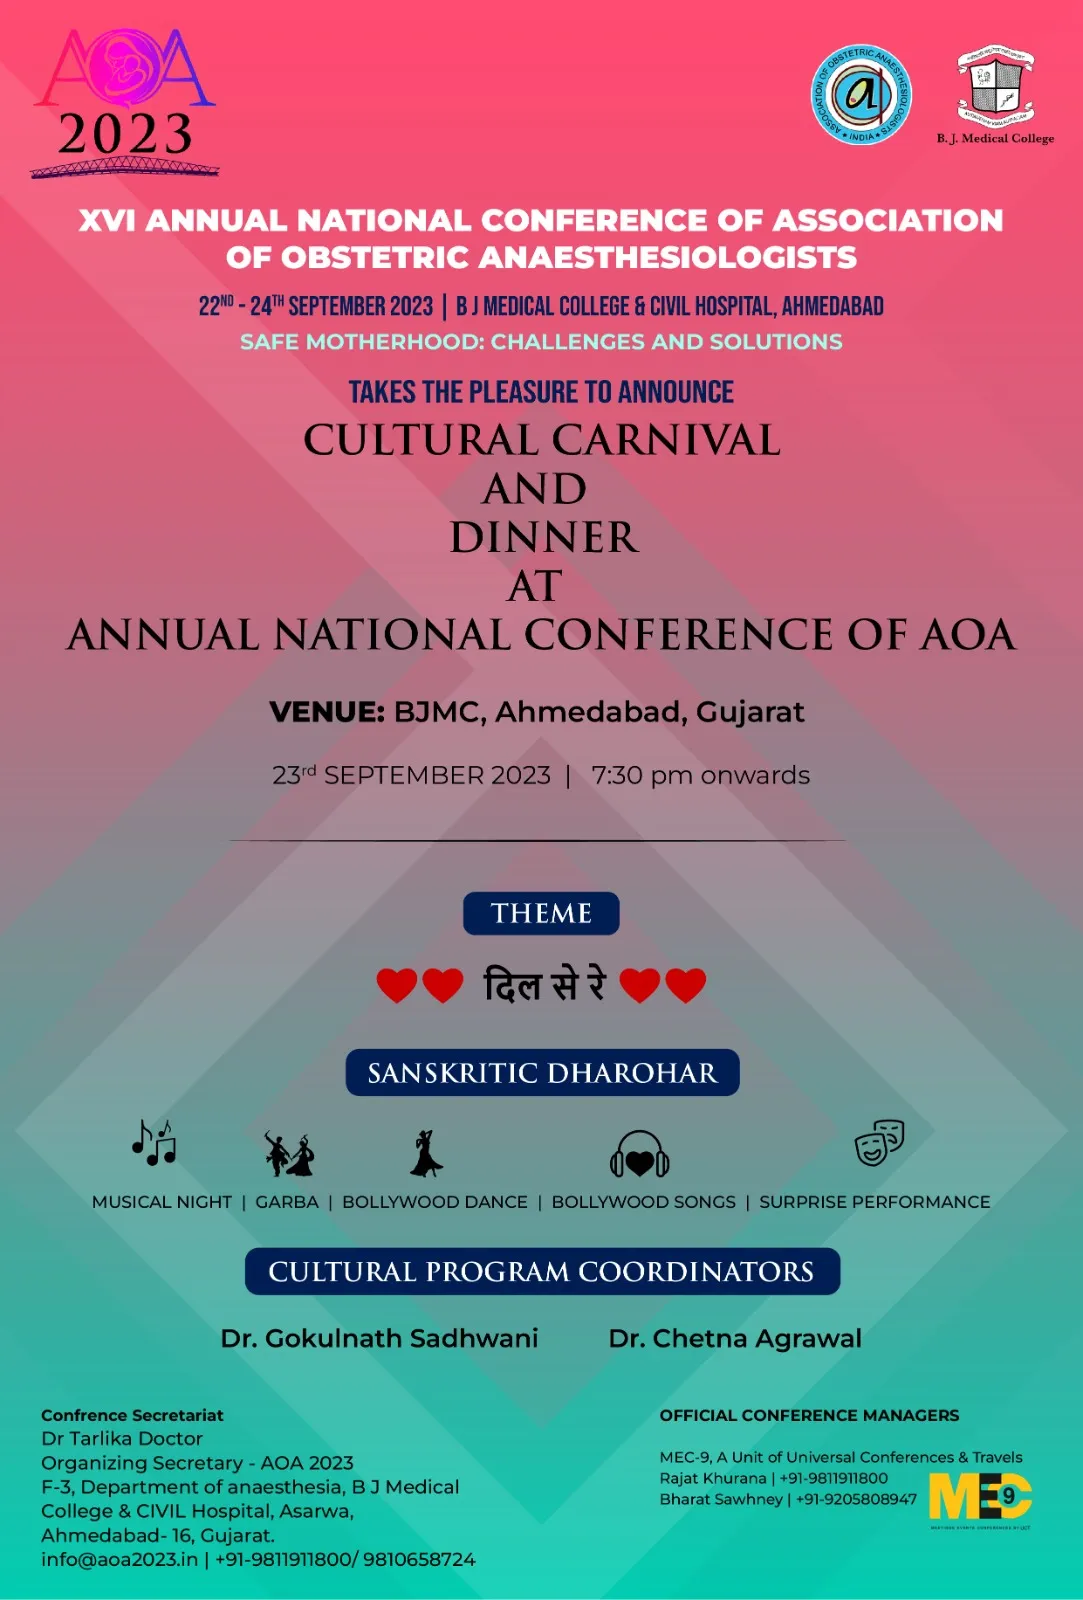 XVI Annual National Conference of Association of Obstetric Anaesthesiologists